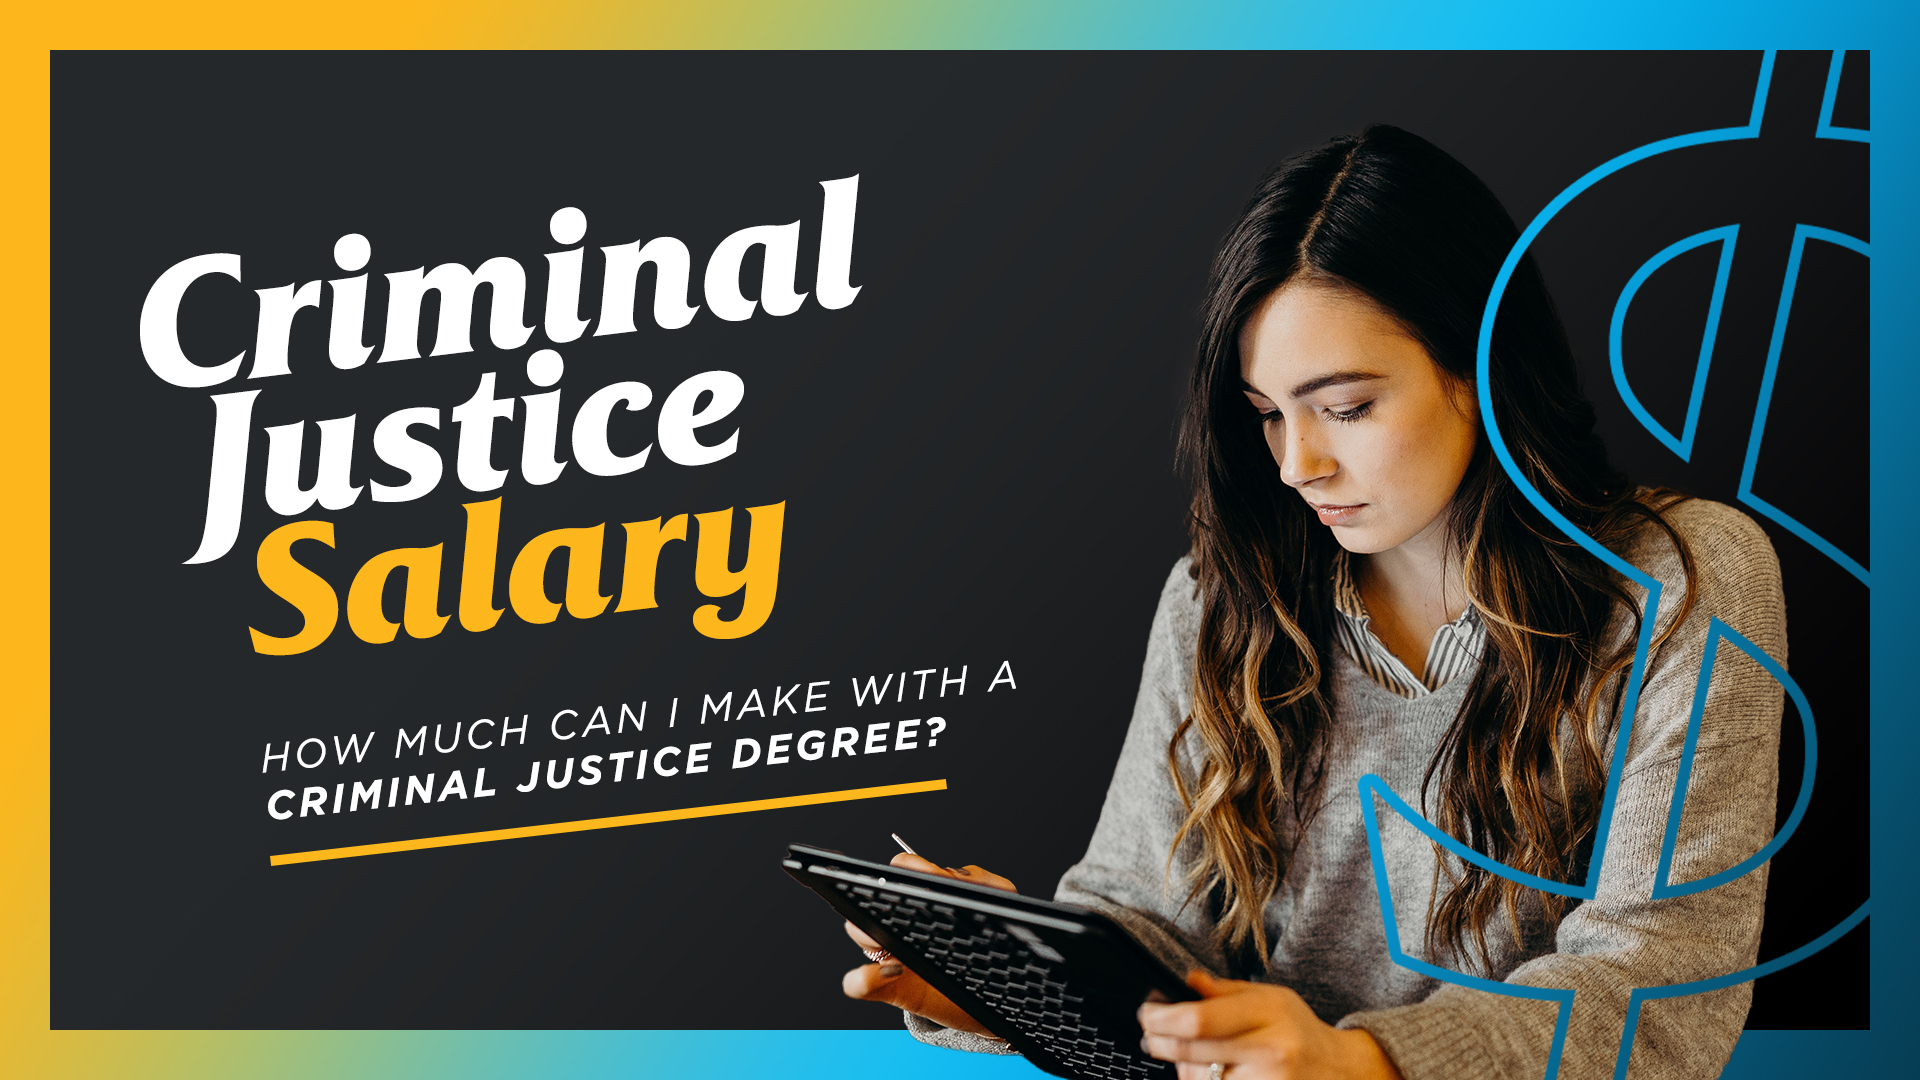 Criminal Justice Salary – How Much Can I Make With a Criminal Justice Degree?